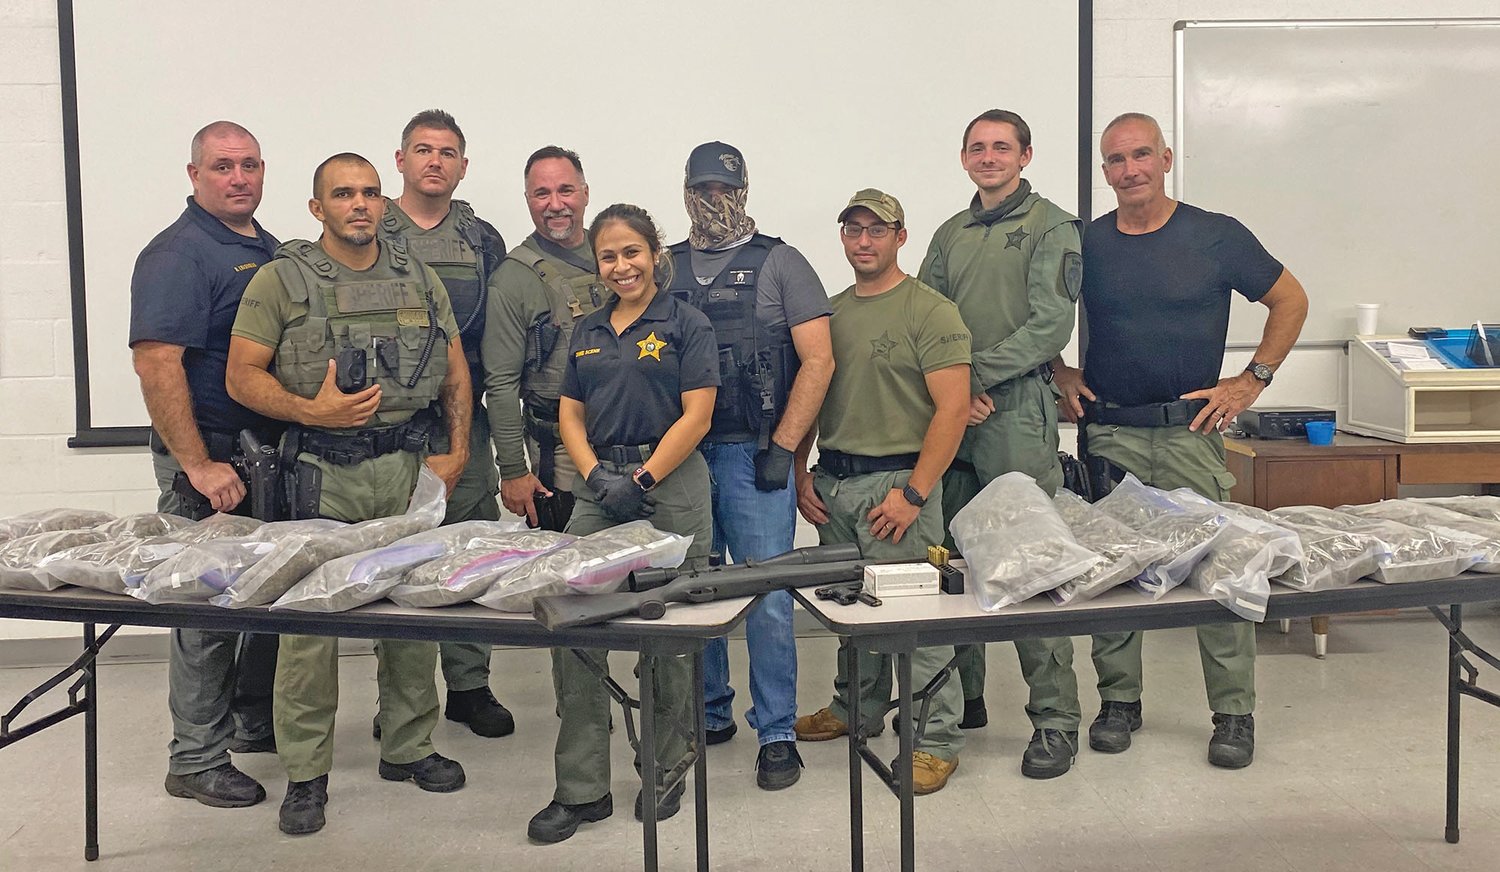 Special to the Lake Okeechobee News/HCSO
CLEWISTON — The Hendry County Sheriff’s team conducted a search warrant on a marijuana grow operation on North Lindero Street.